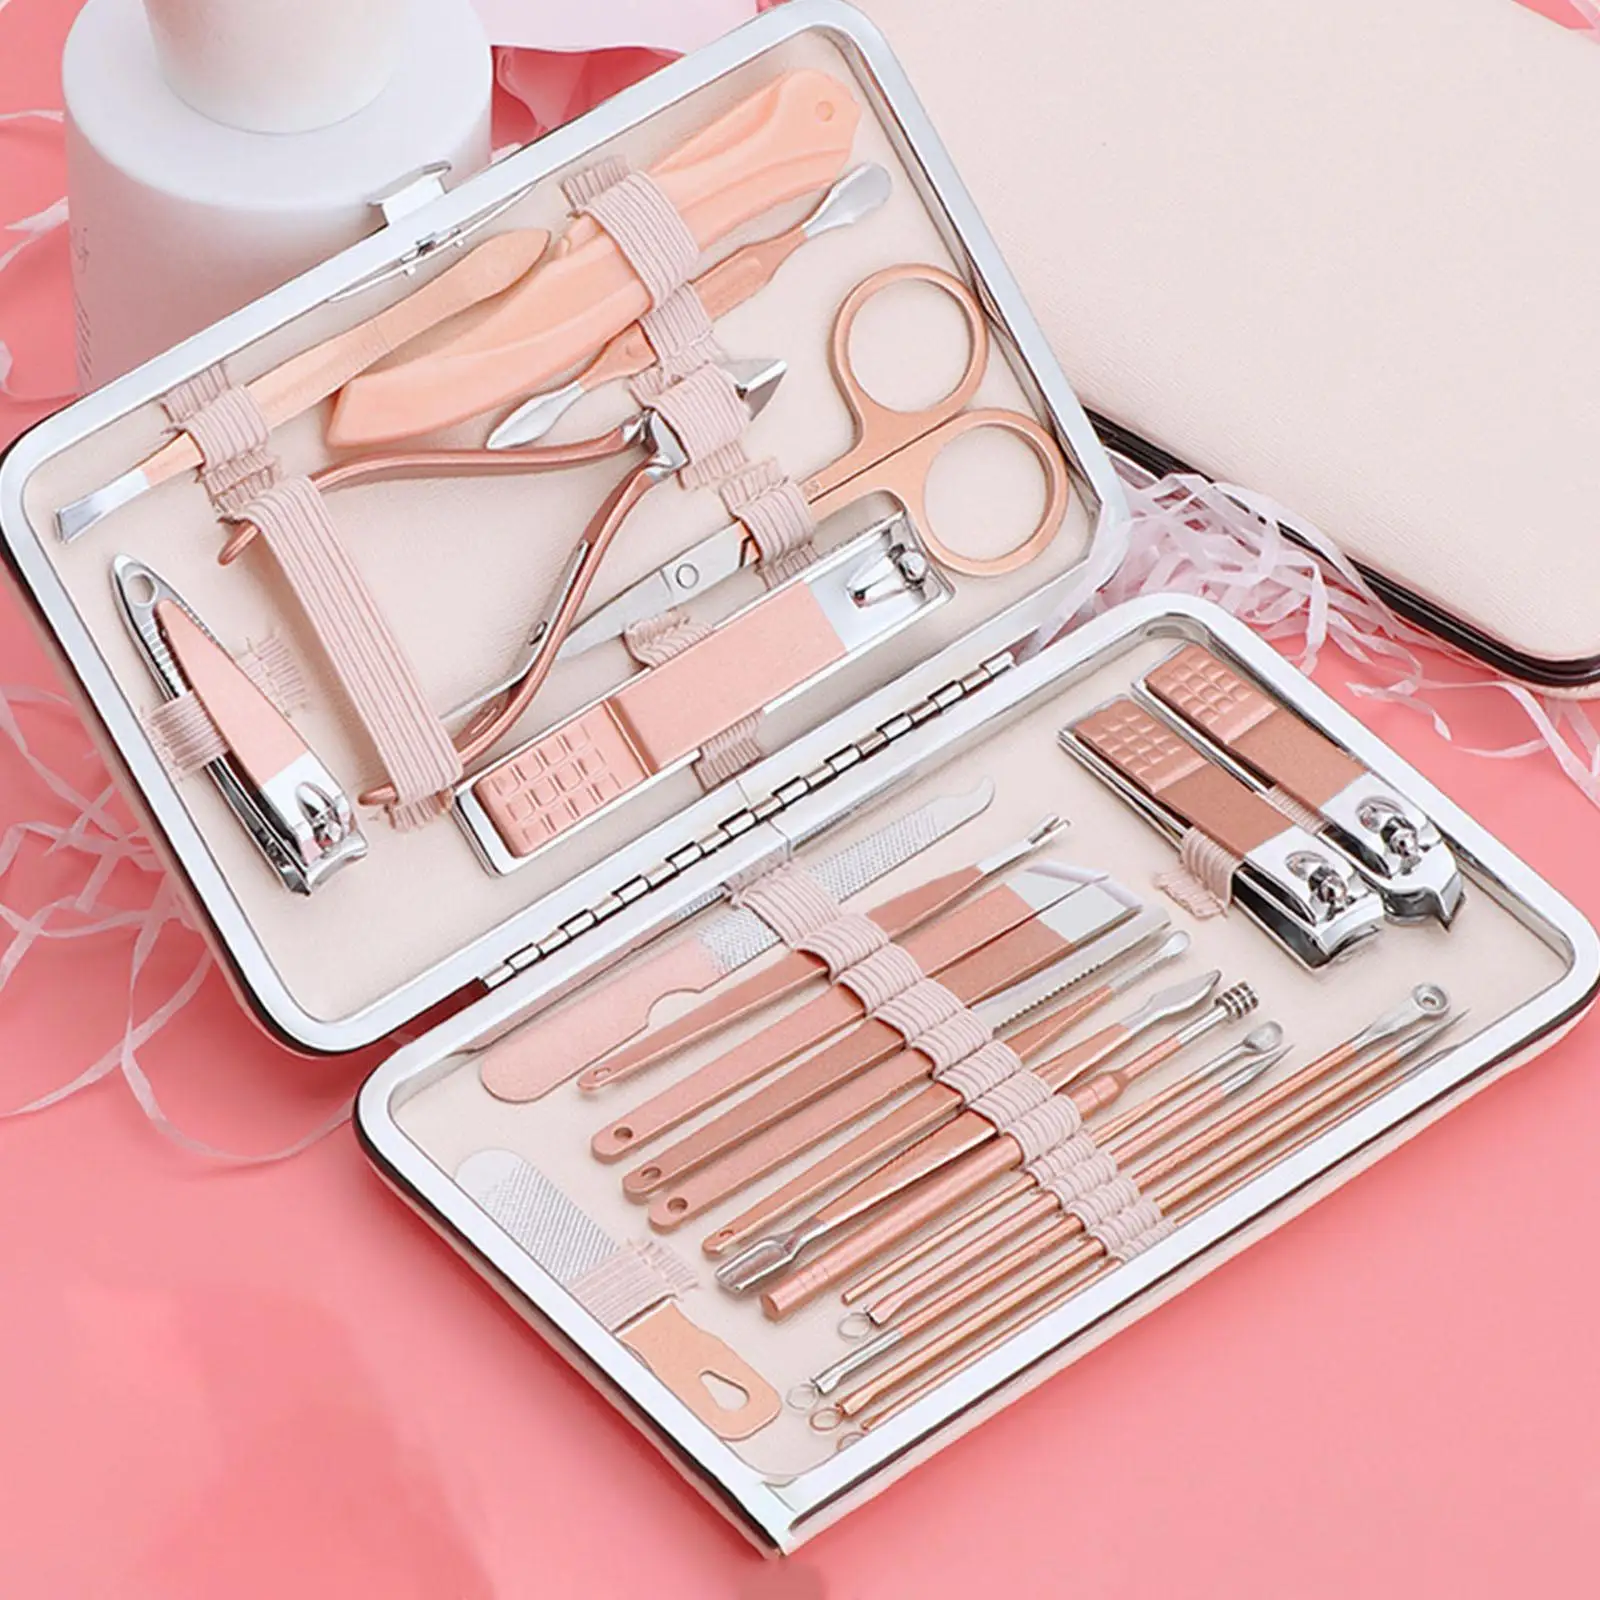 23x Manicure Nail Set Tools Pedicure Scissors for Nail Care